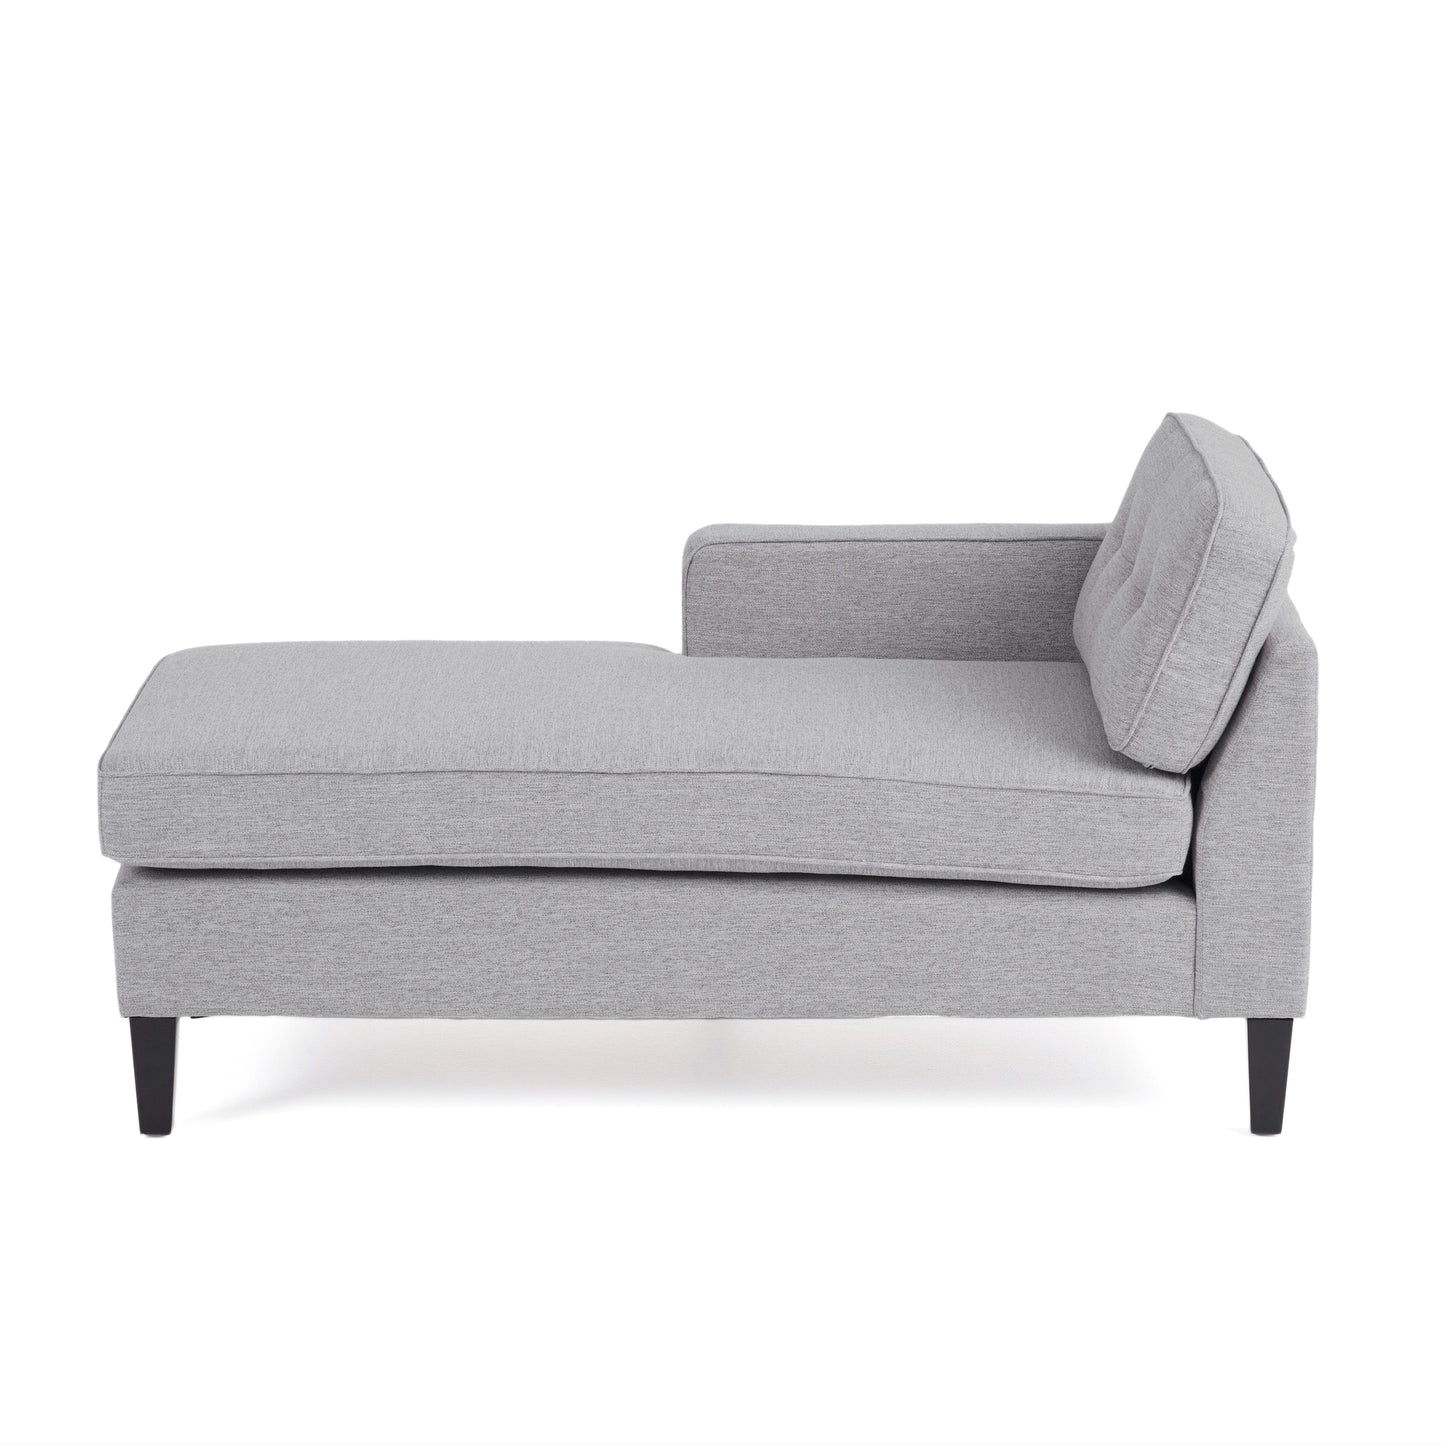 Tempe Fabric Left Arm Chaise Lounge